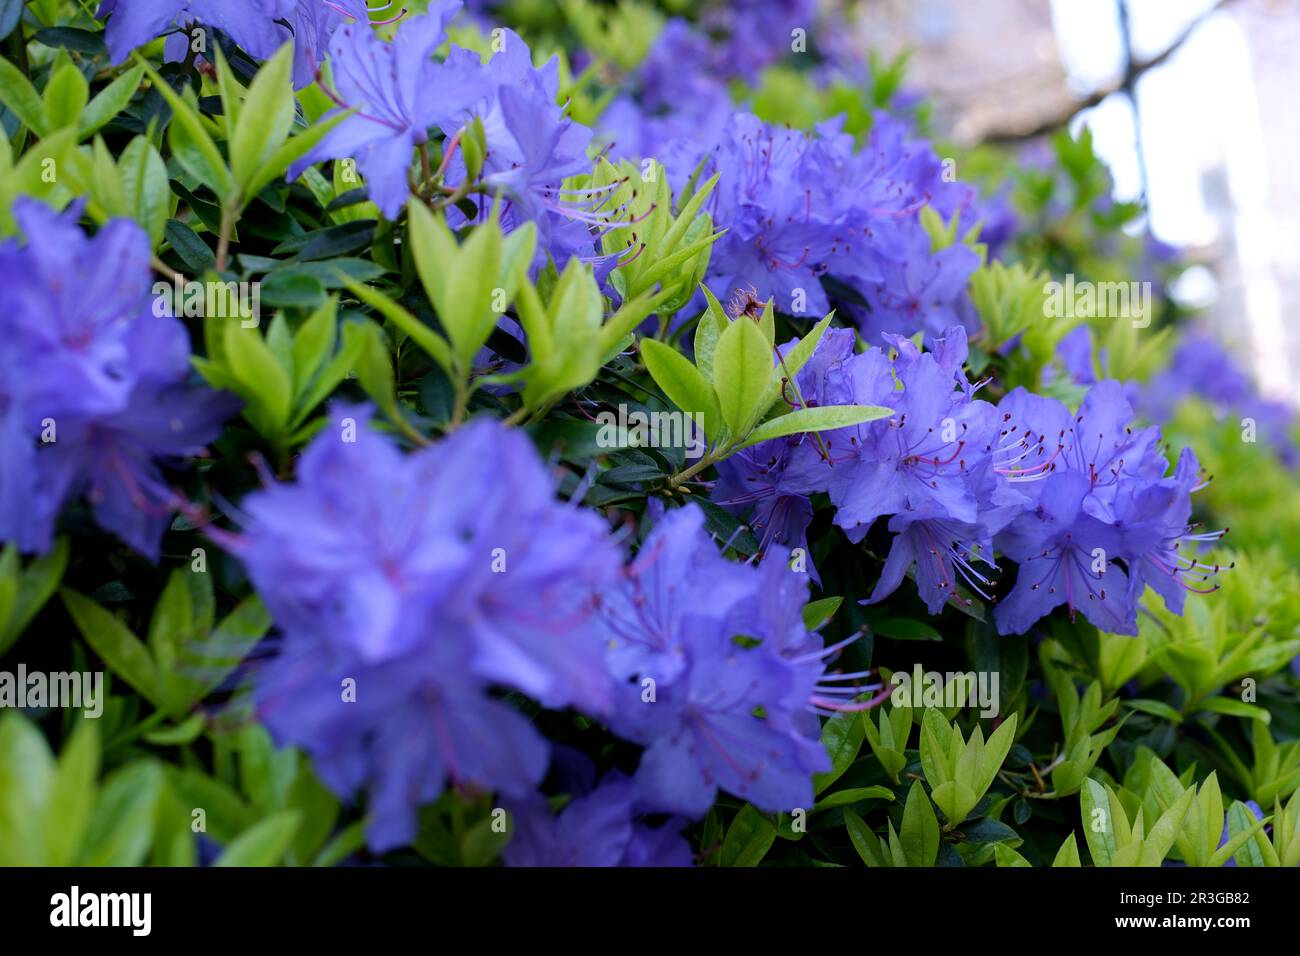 An amazing, low-growing evergreen shrub that blooms with blue flowers in the spring. It thrives in sunny areas. It is classified as a dwarf rhododendron. Very small leaves Rhododendron blue diamond Stock Photo